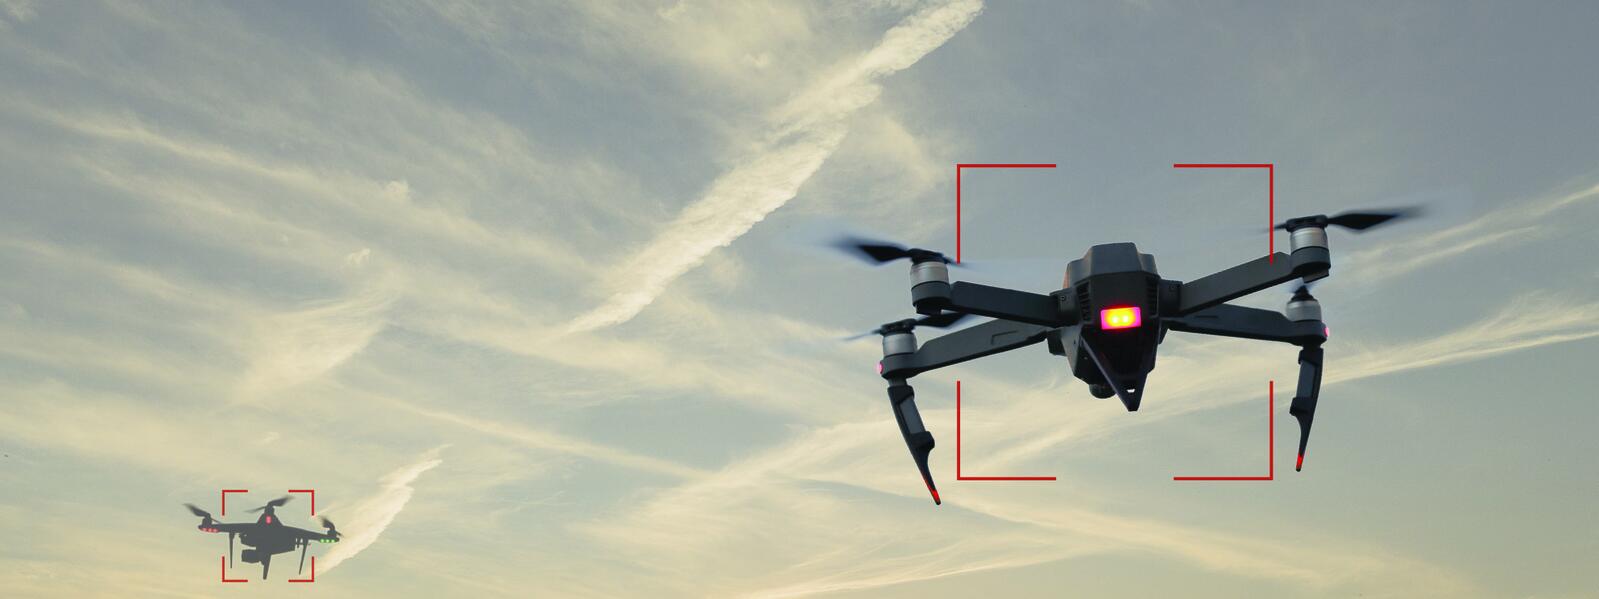 Analytics example of drones being tracked in the sky.